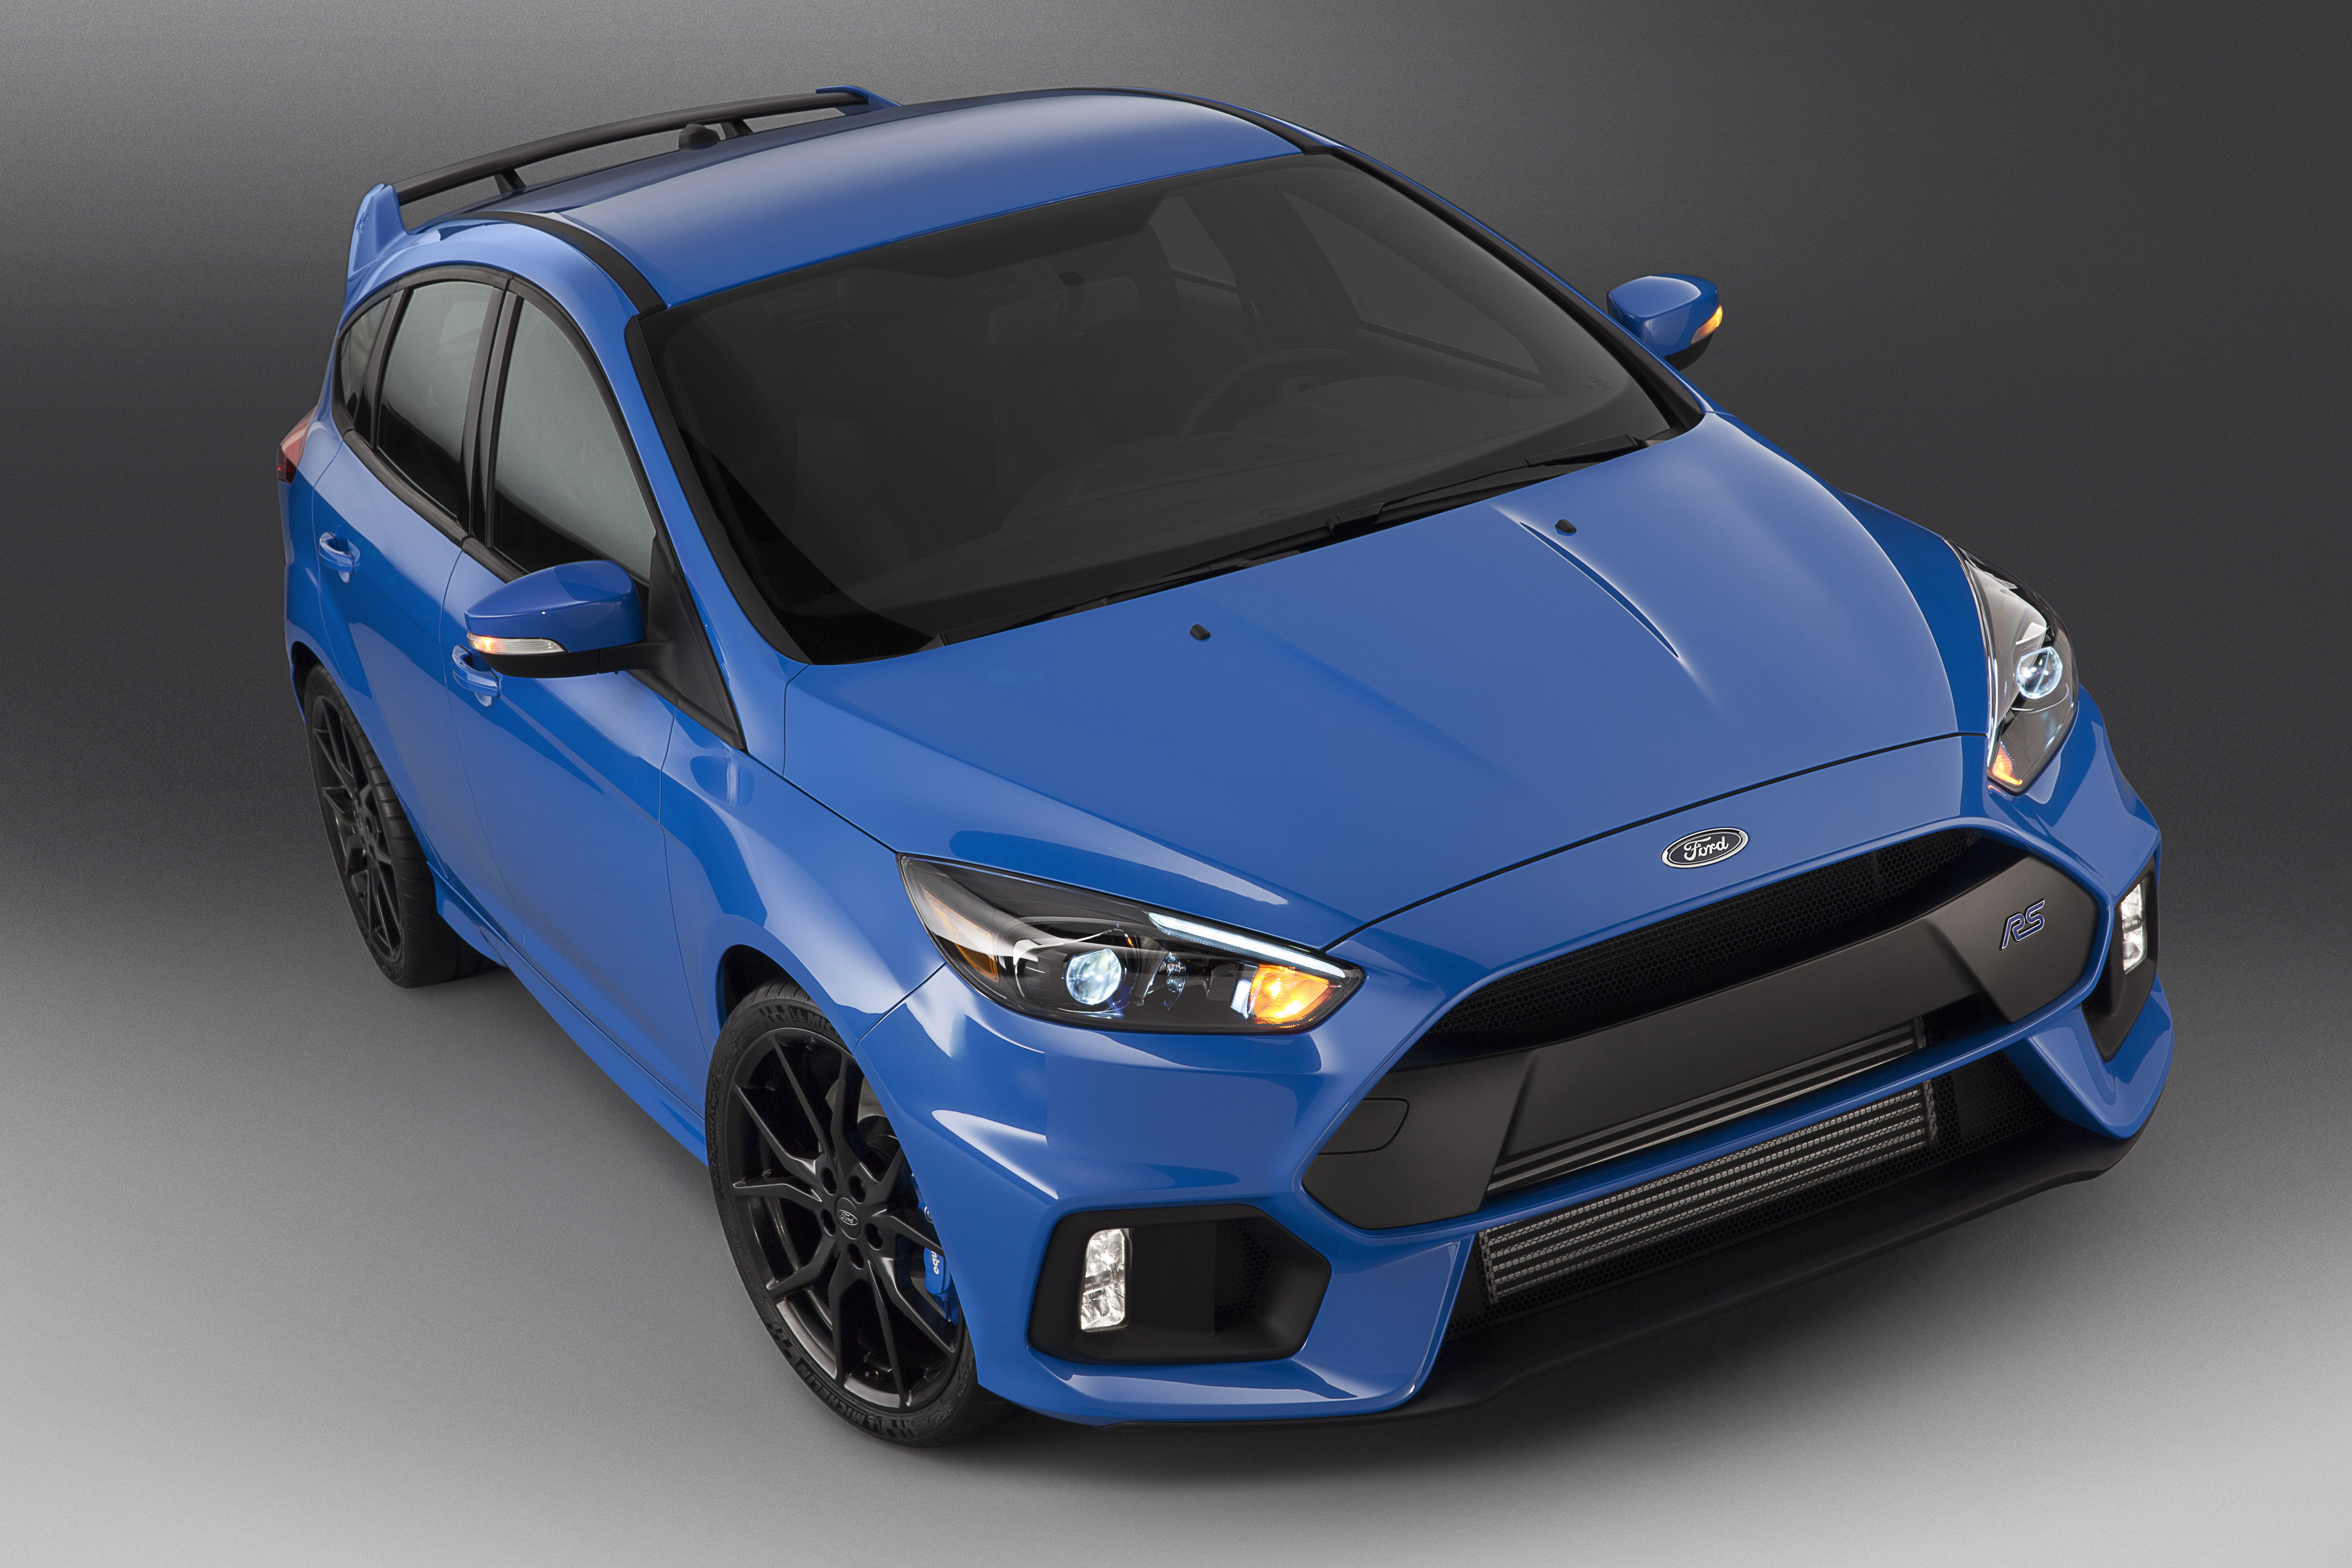 Ford Focus exterior restyling